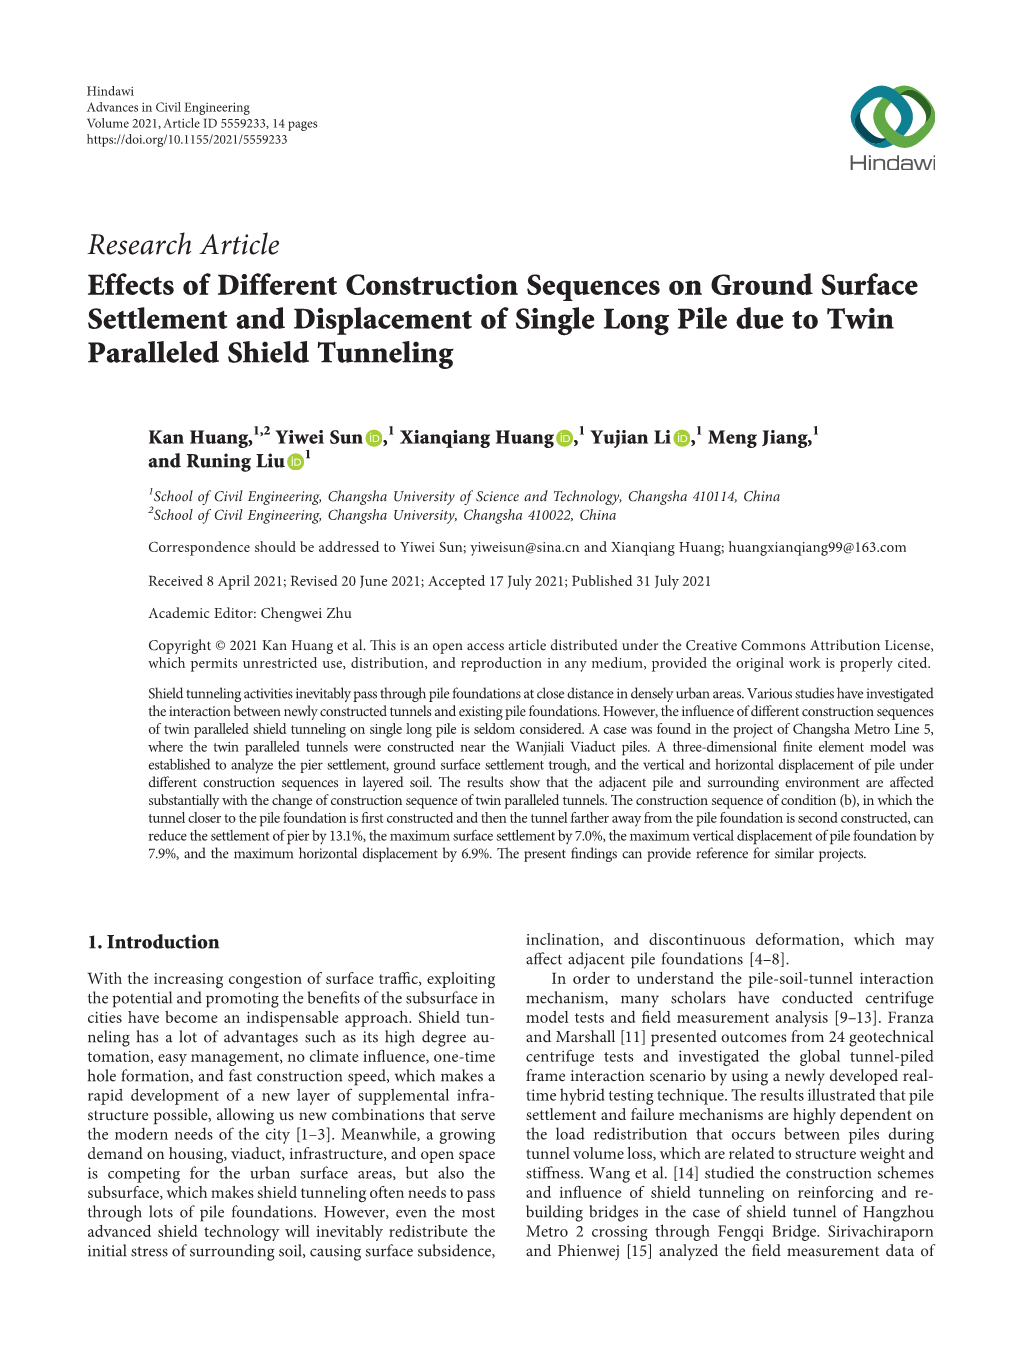 Effects of Different Construction Sequences on Ground Surface Settlement and Displacement of Single Long Pile Due to Twin Paralleled Shield Tunneling